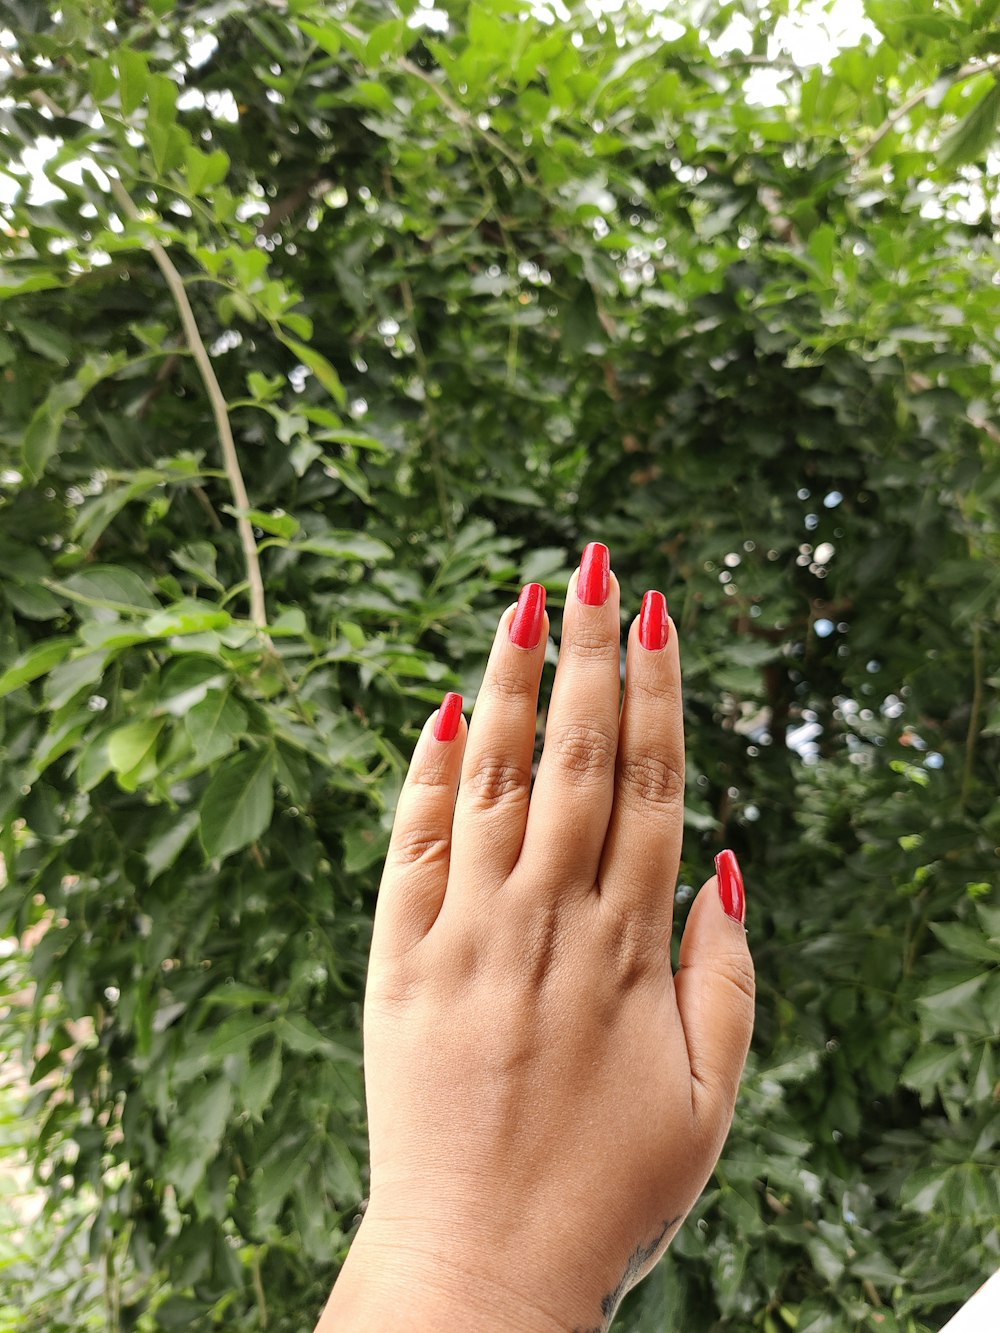 woman with red manicure holding green leaves during daytime